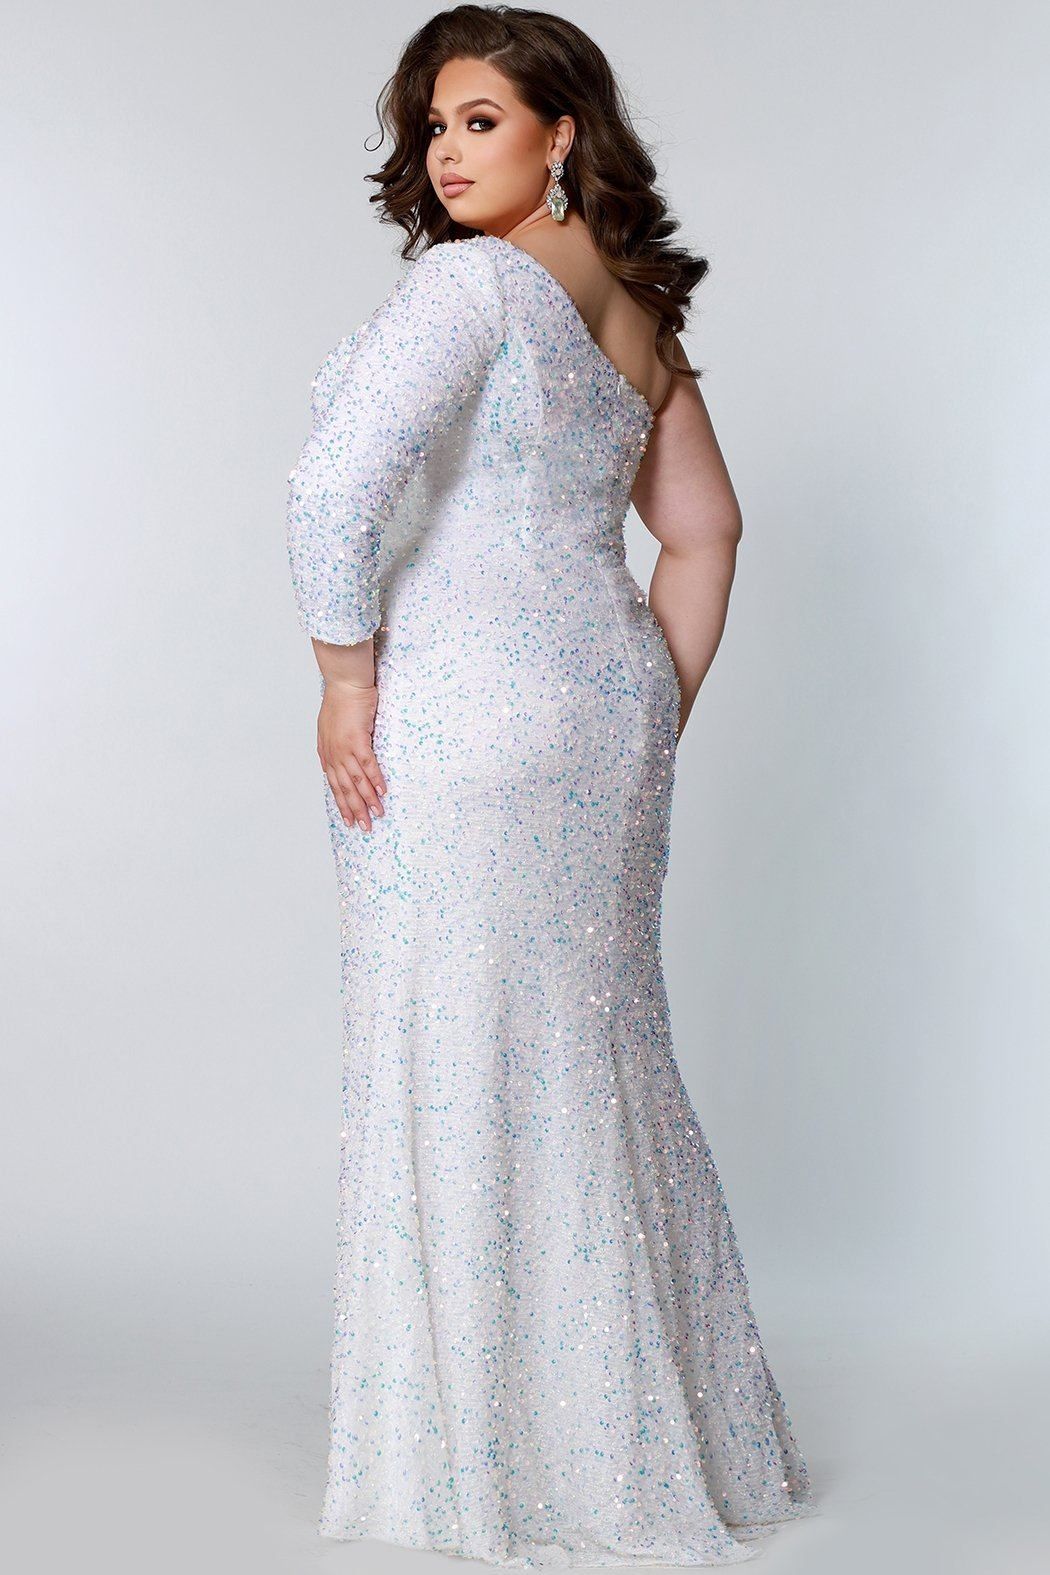 Style SC7319 Sydney's Closet Plus Size 20 Prom White Side Slit Dress on Queenly